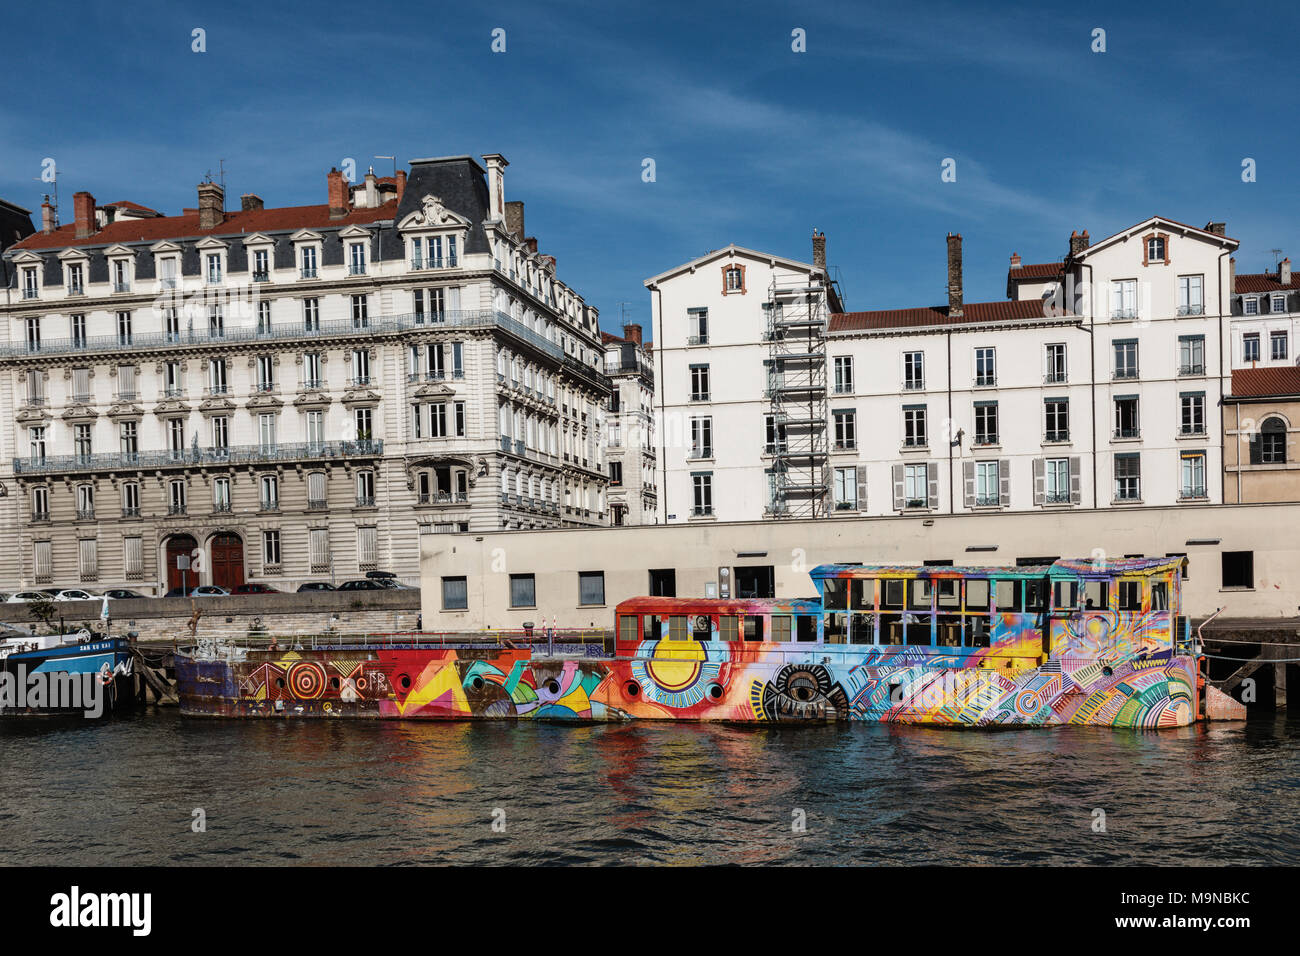 A colourful barge on the Saone river taken from a pleasure cruiser boat, Lyon, France. Stock Photo